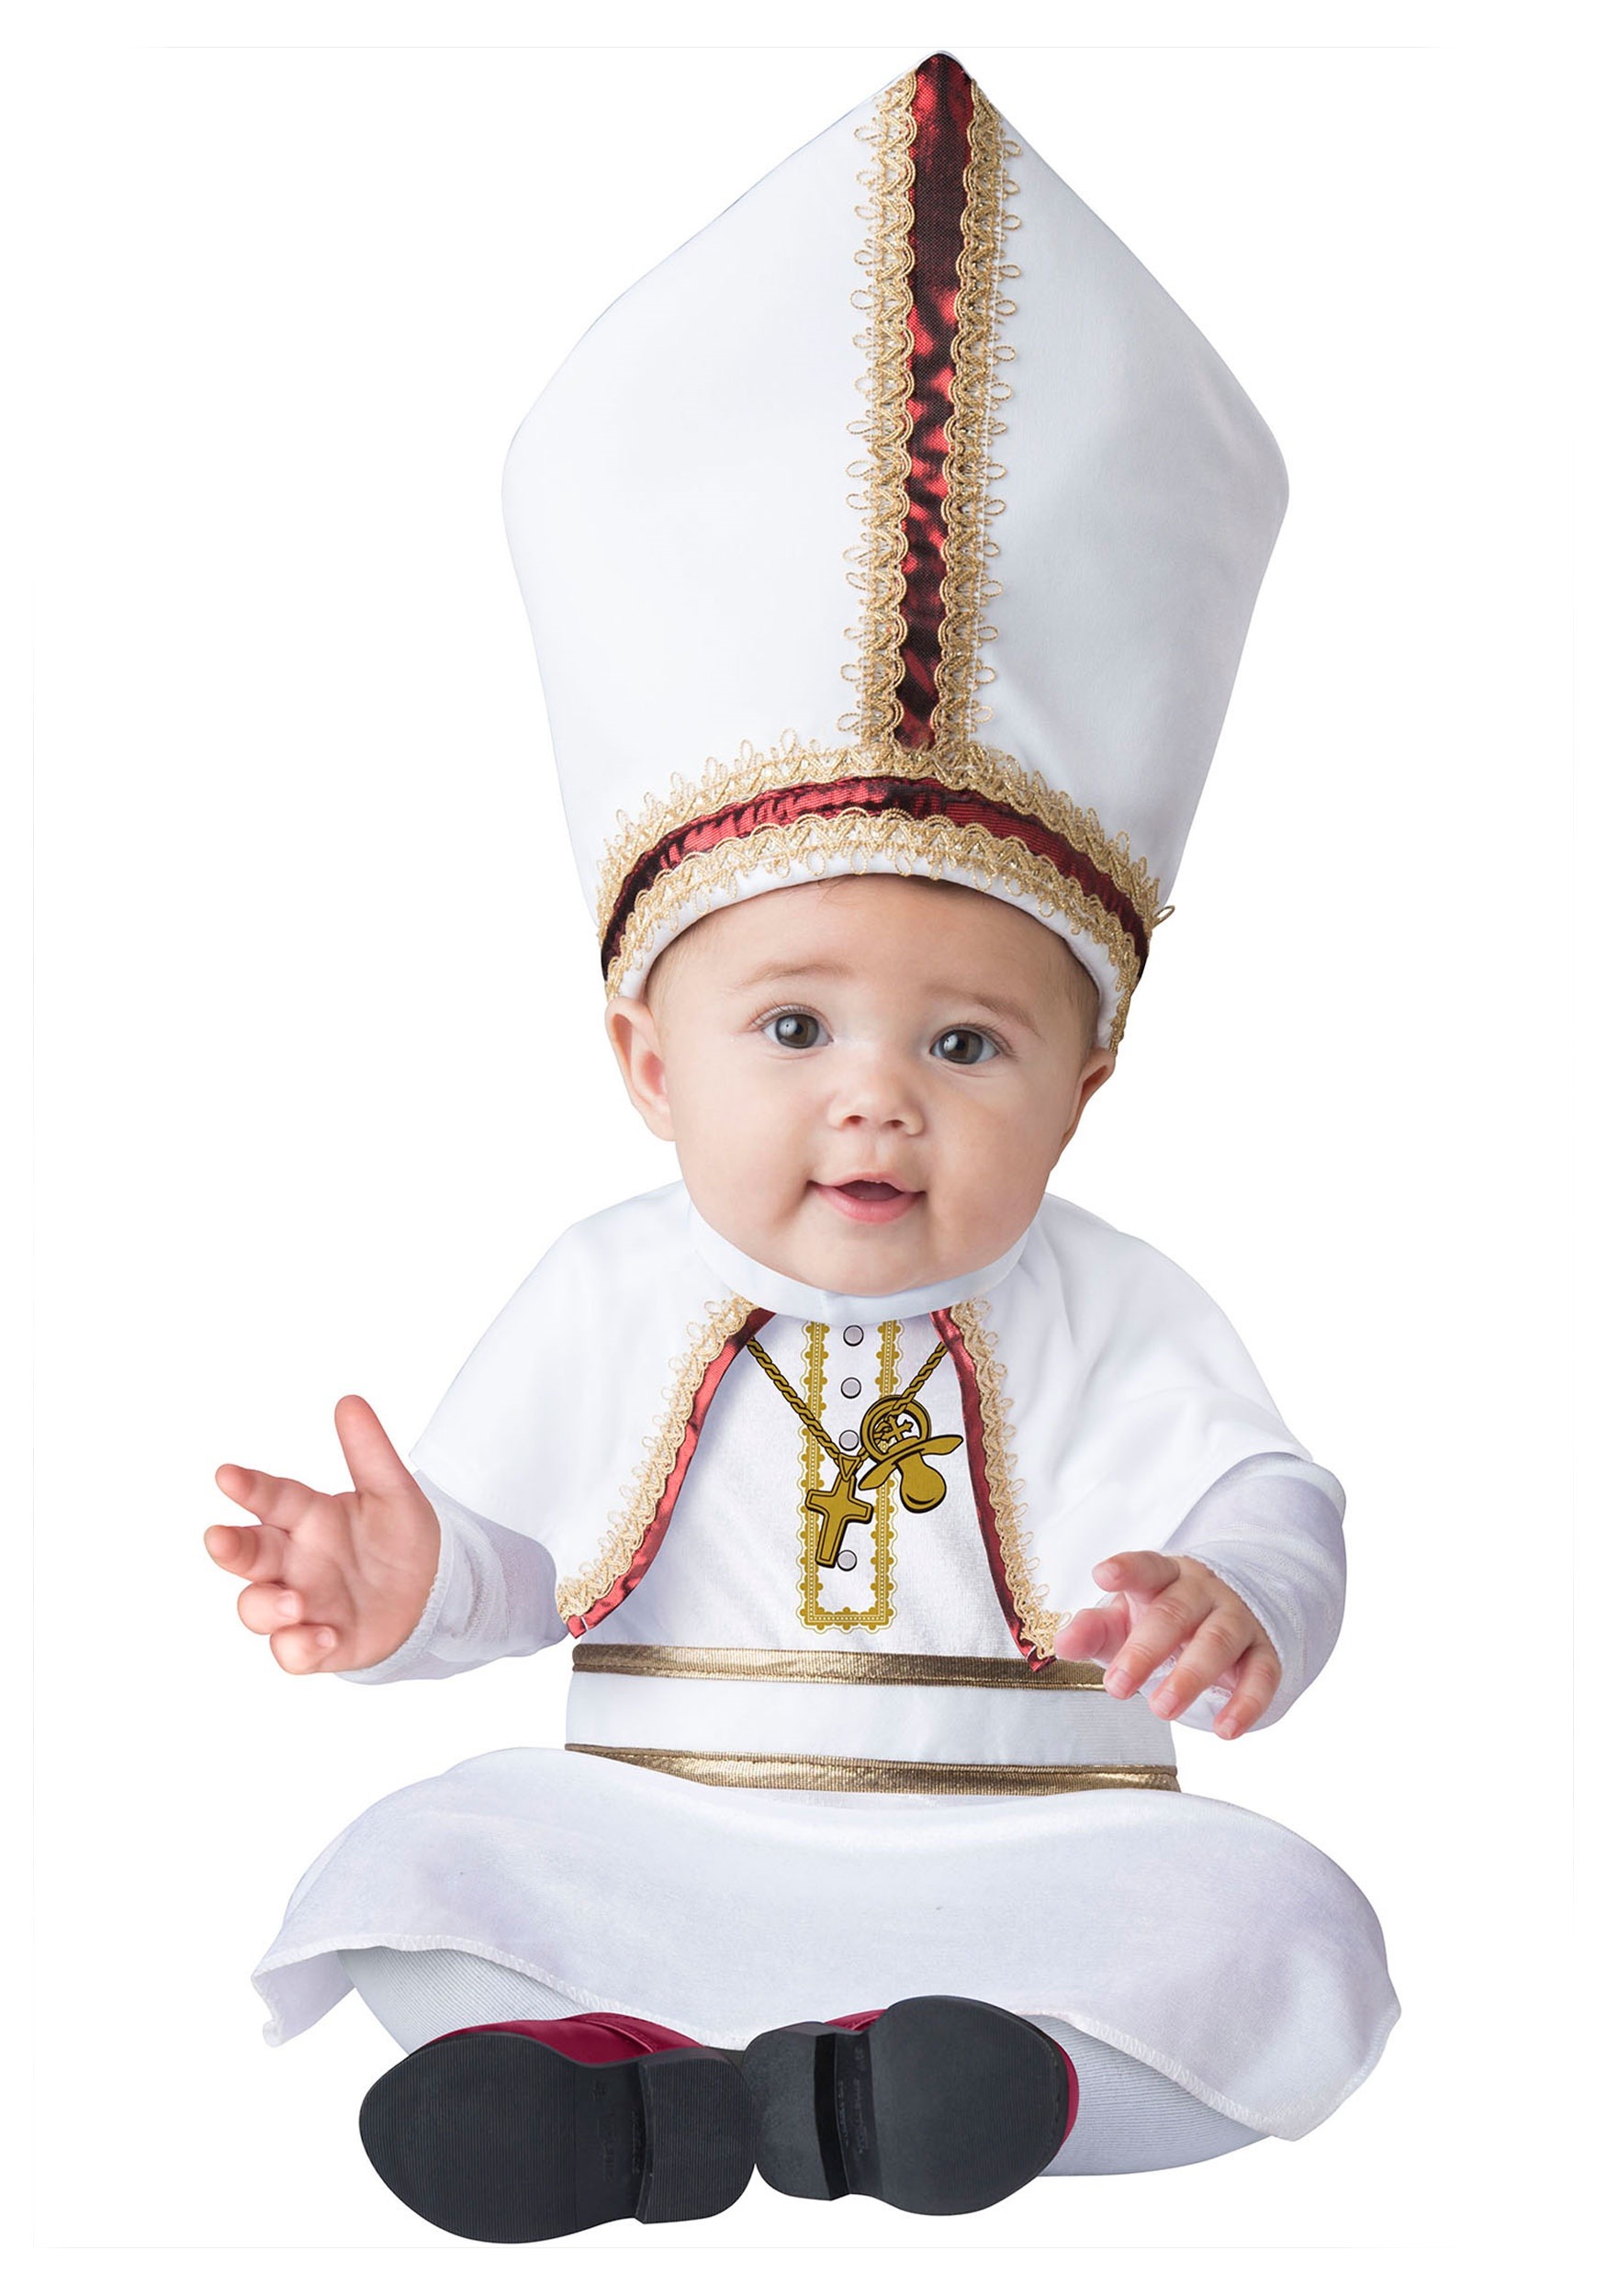 Photos - Fancy Dress Fun World Pint Sized Pope Baby Costume Red/Beige/White INCK16079